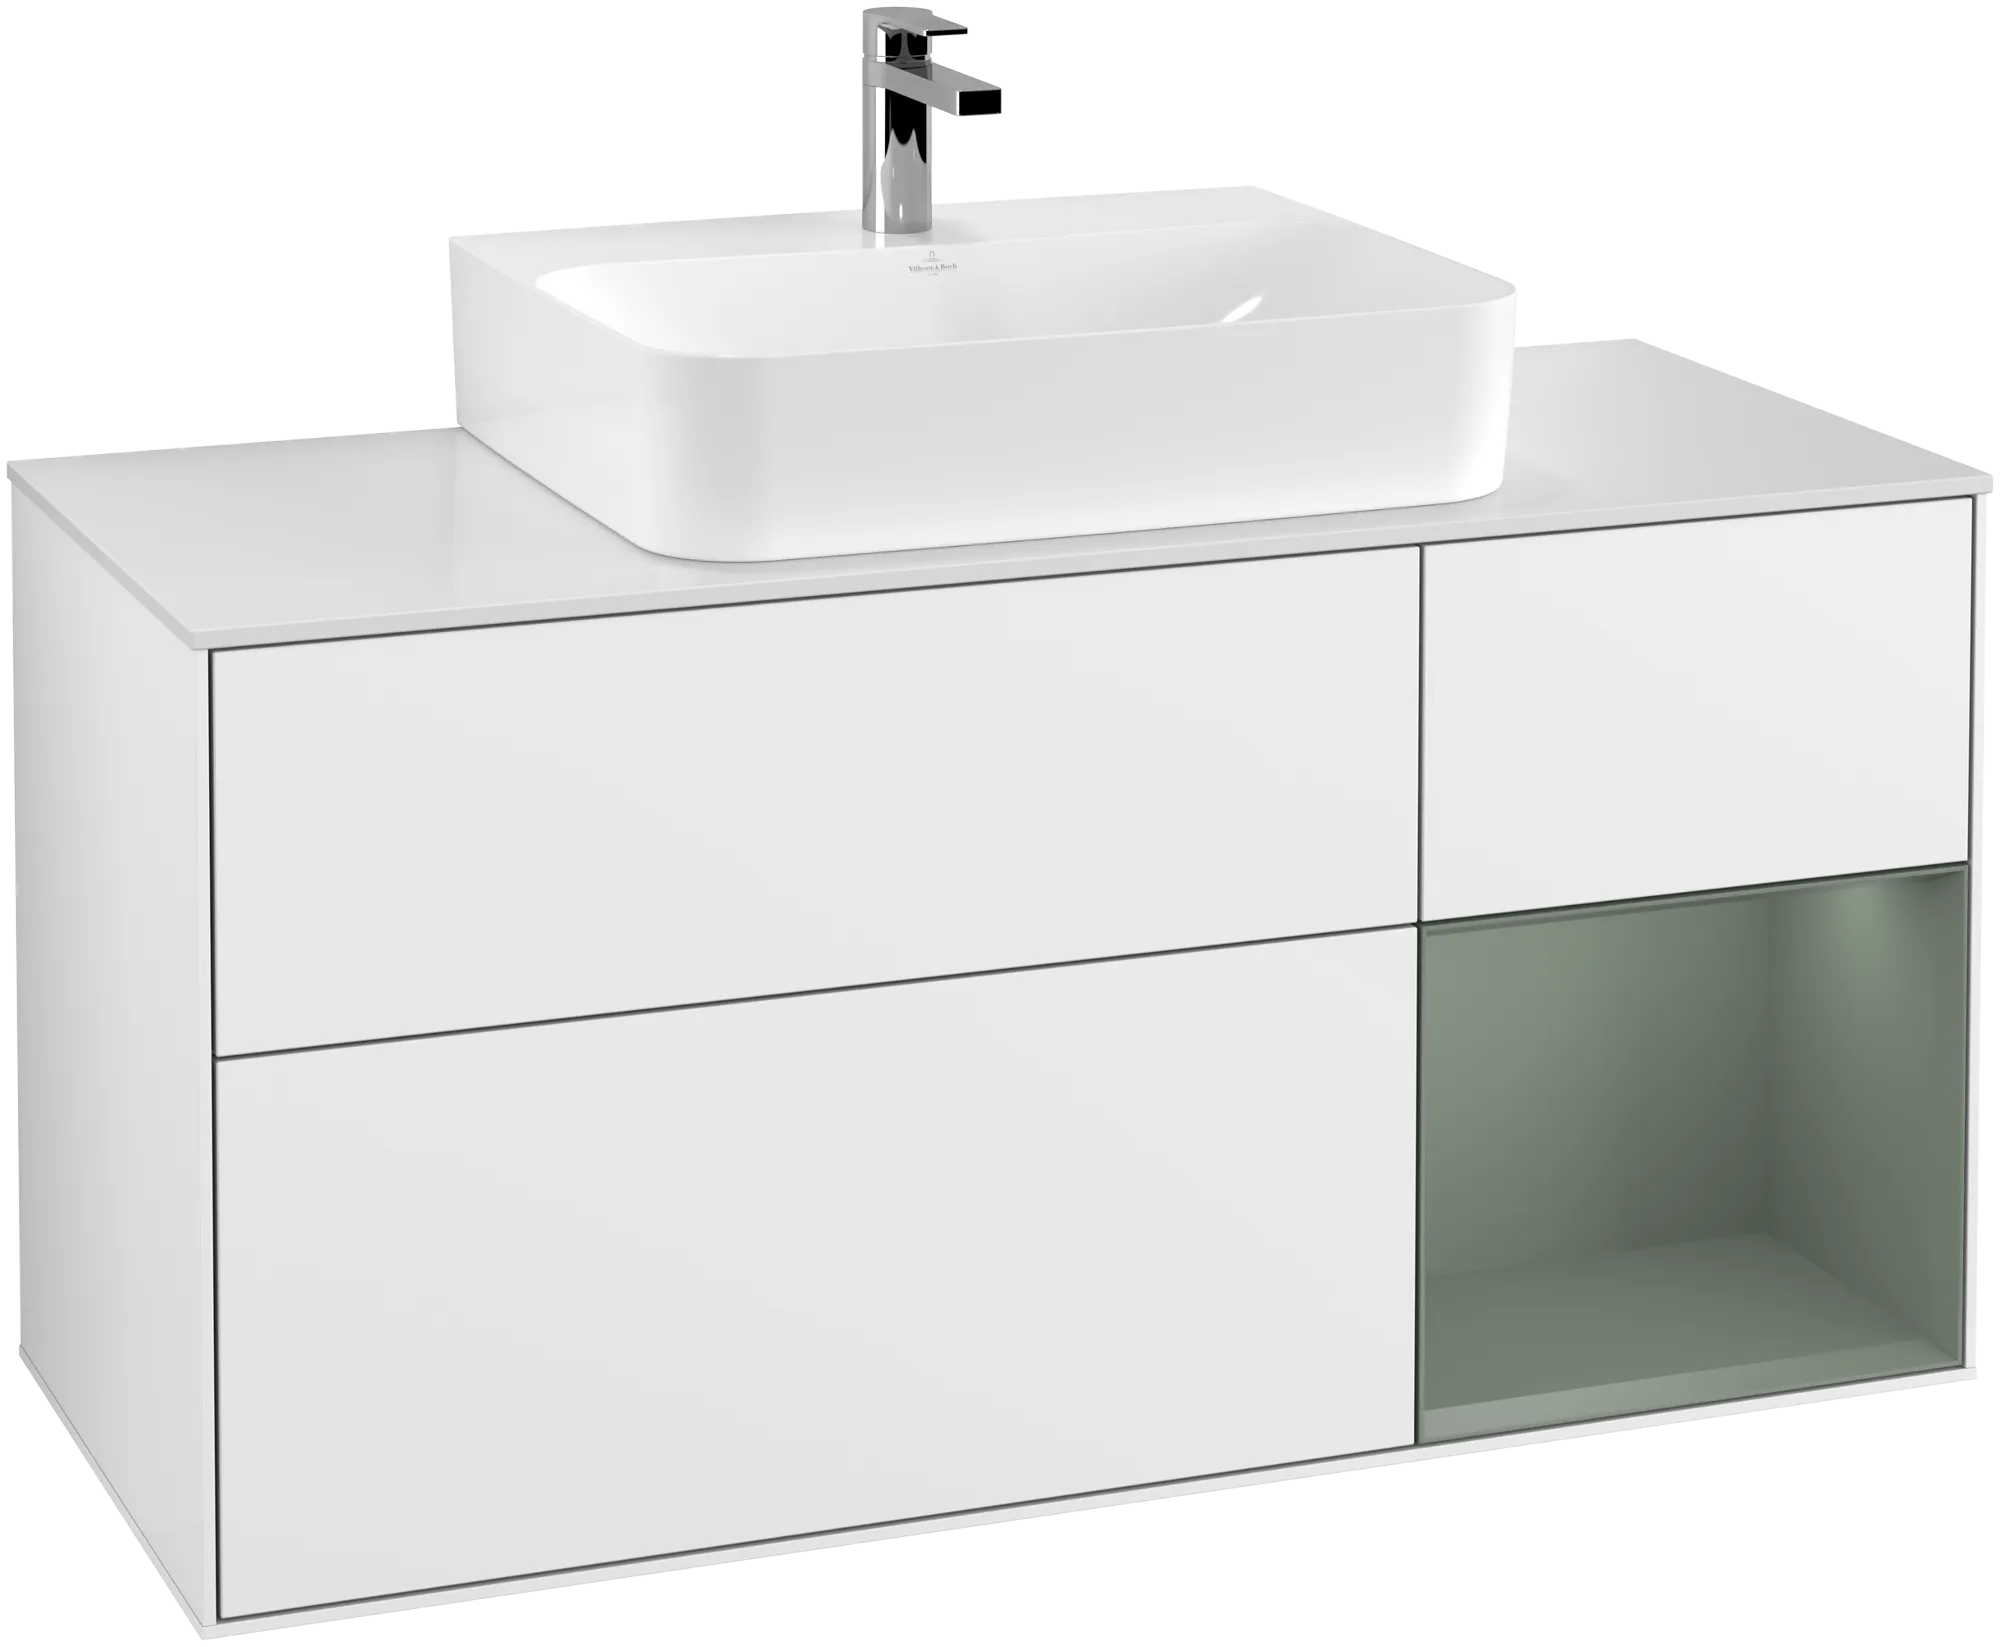 Picture of VILLEROY BOCH Finion Vanity unit, with lighting, 3 pull-out compartments, 1200 x 603 x 501 mm, Glossy White Lacquer / Olive Matt Lacquer / Glass White Matt #G171GMGF